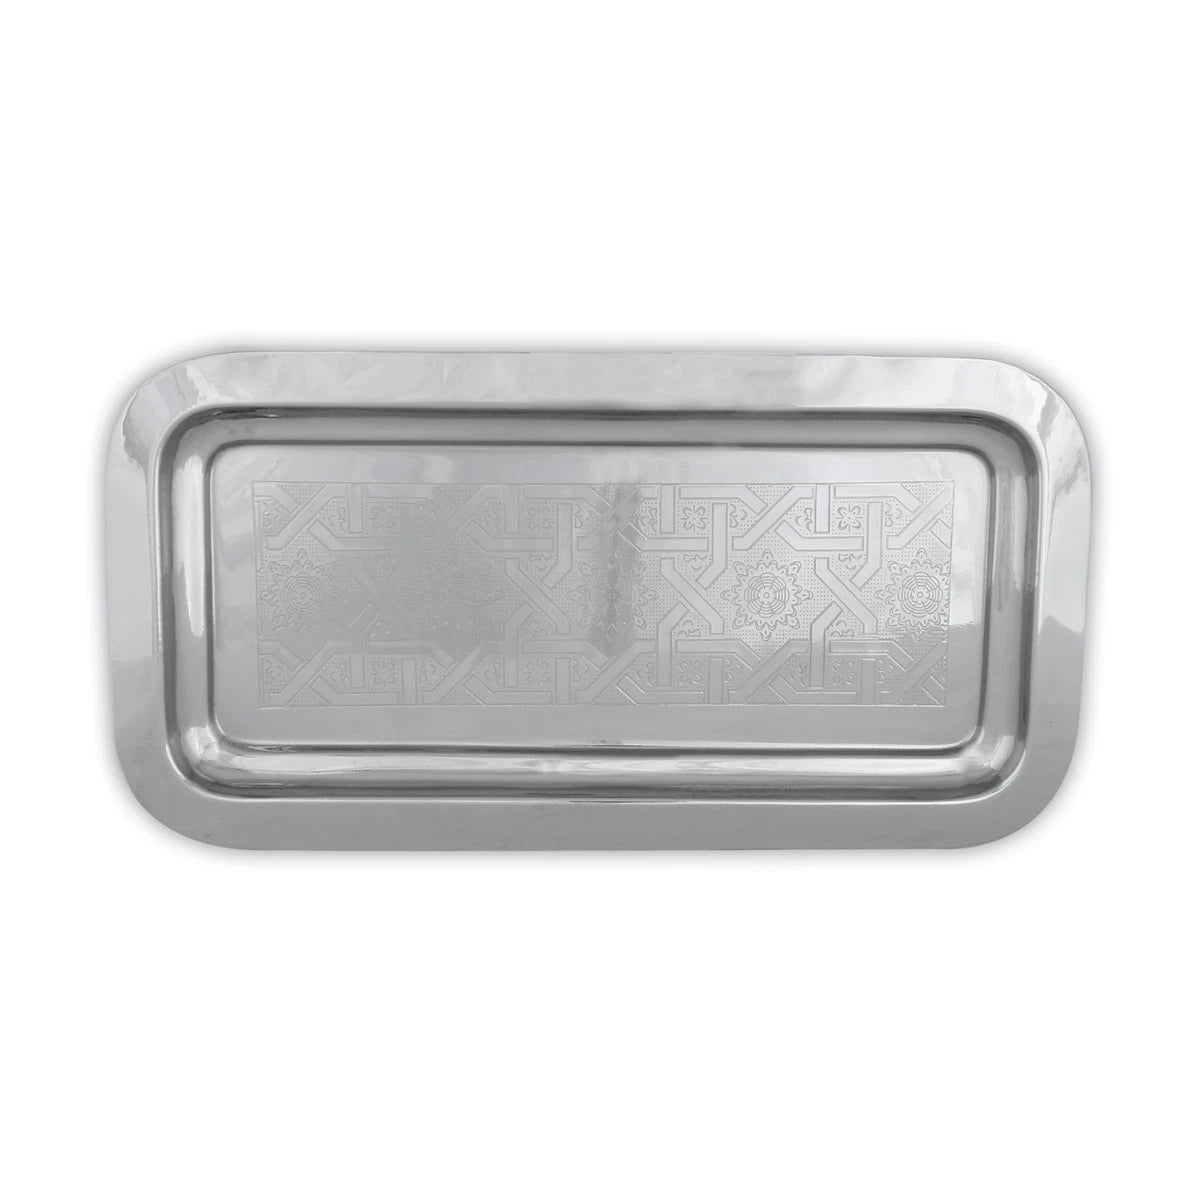 Top View of Ornamental Brass Rectangular Tray - Silver